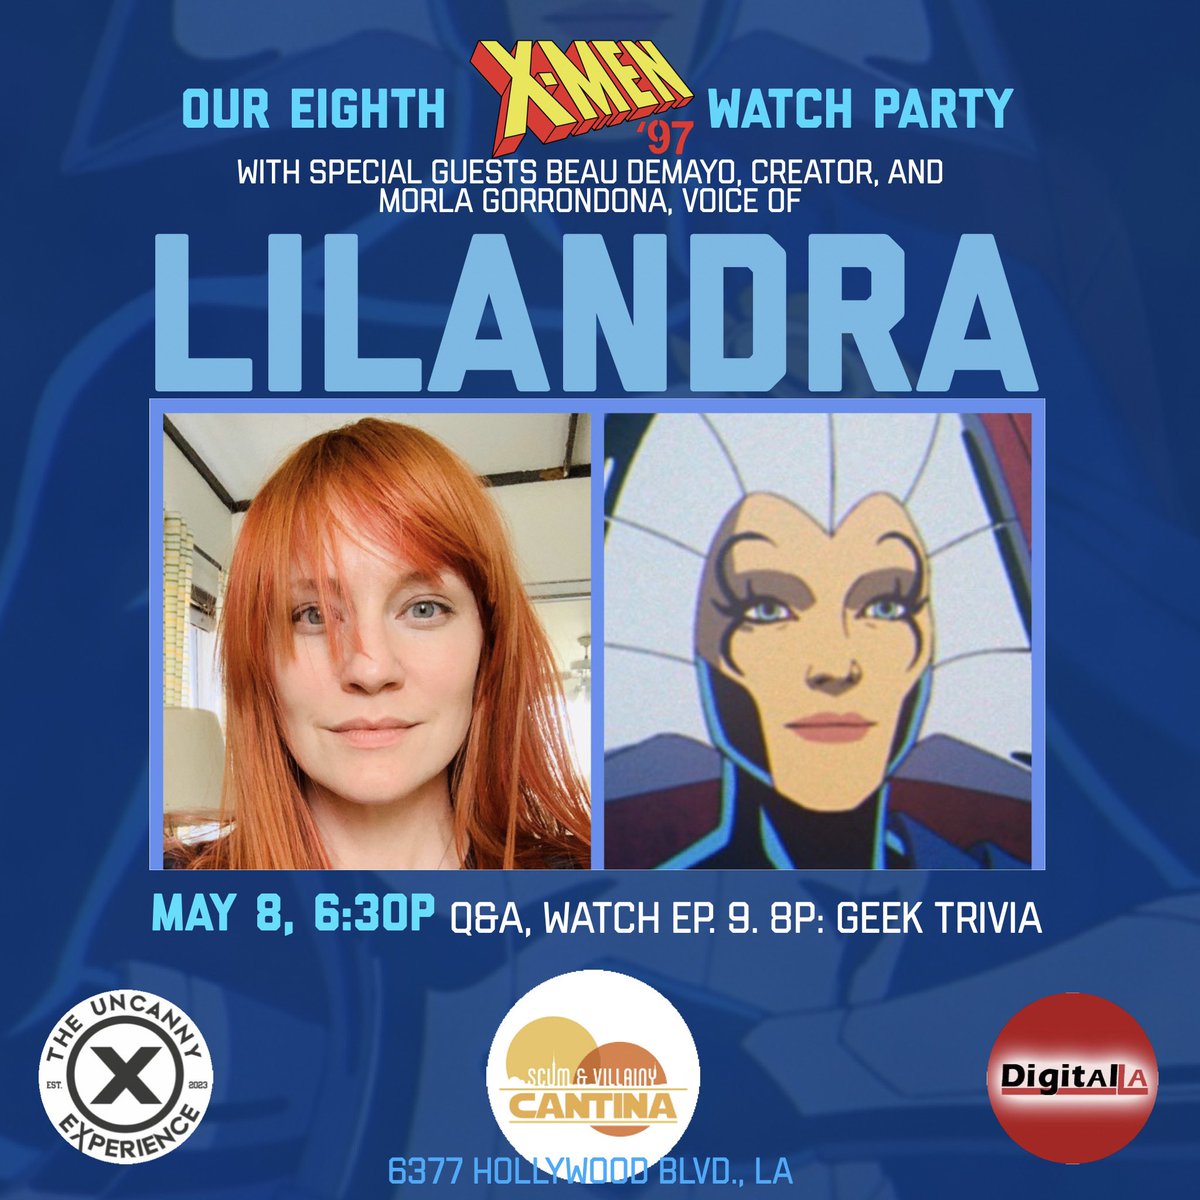 Excited to co-host our eighth X-Men '97 Watch Party and Q&A with showrunner and creator @BeauDemayo and voice of Lilandra @actor_morla May 8, 6:30p at Scum & Villainy in Hollywood with @theuncannyexp @xreadspodcast #xmen97 @SVCantina Free to attend! 21+